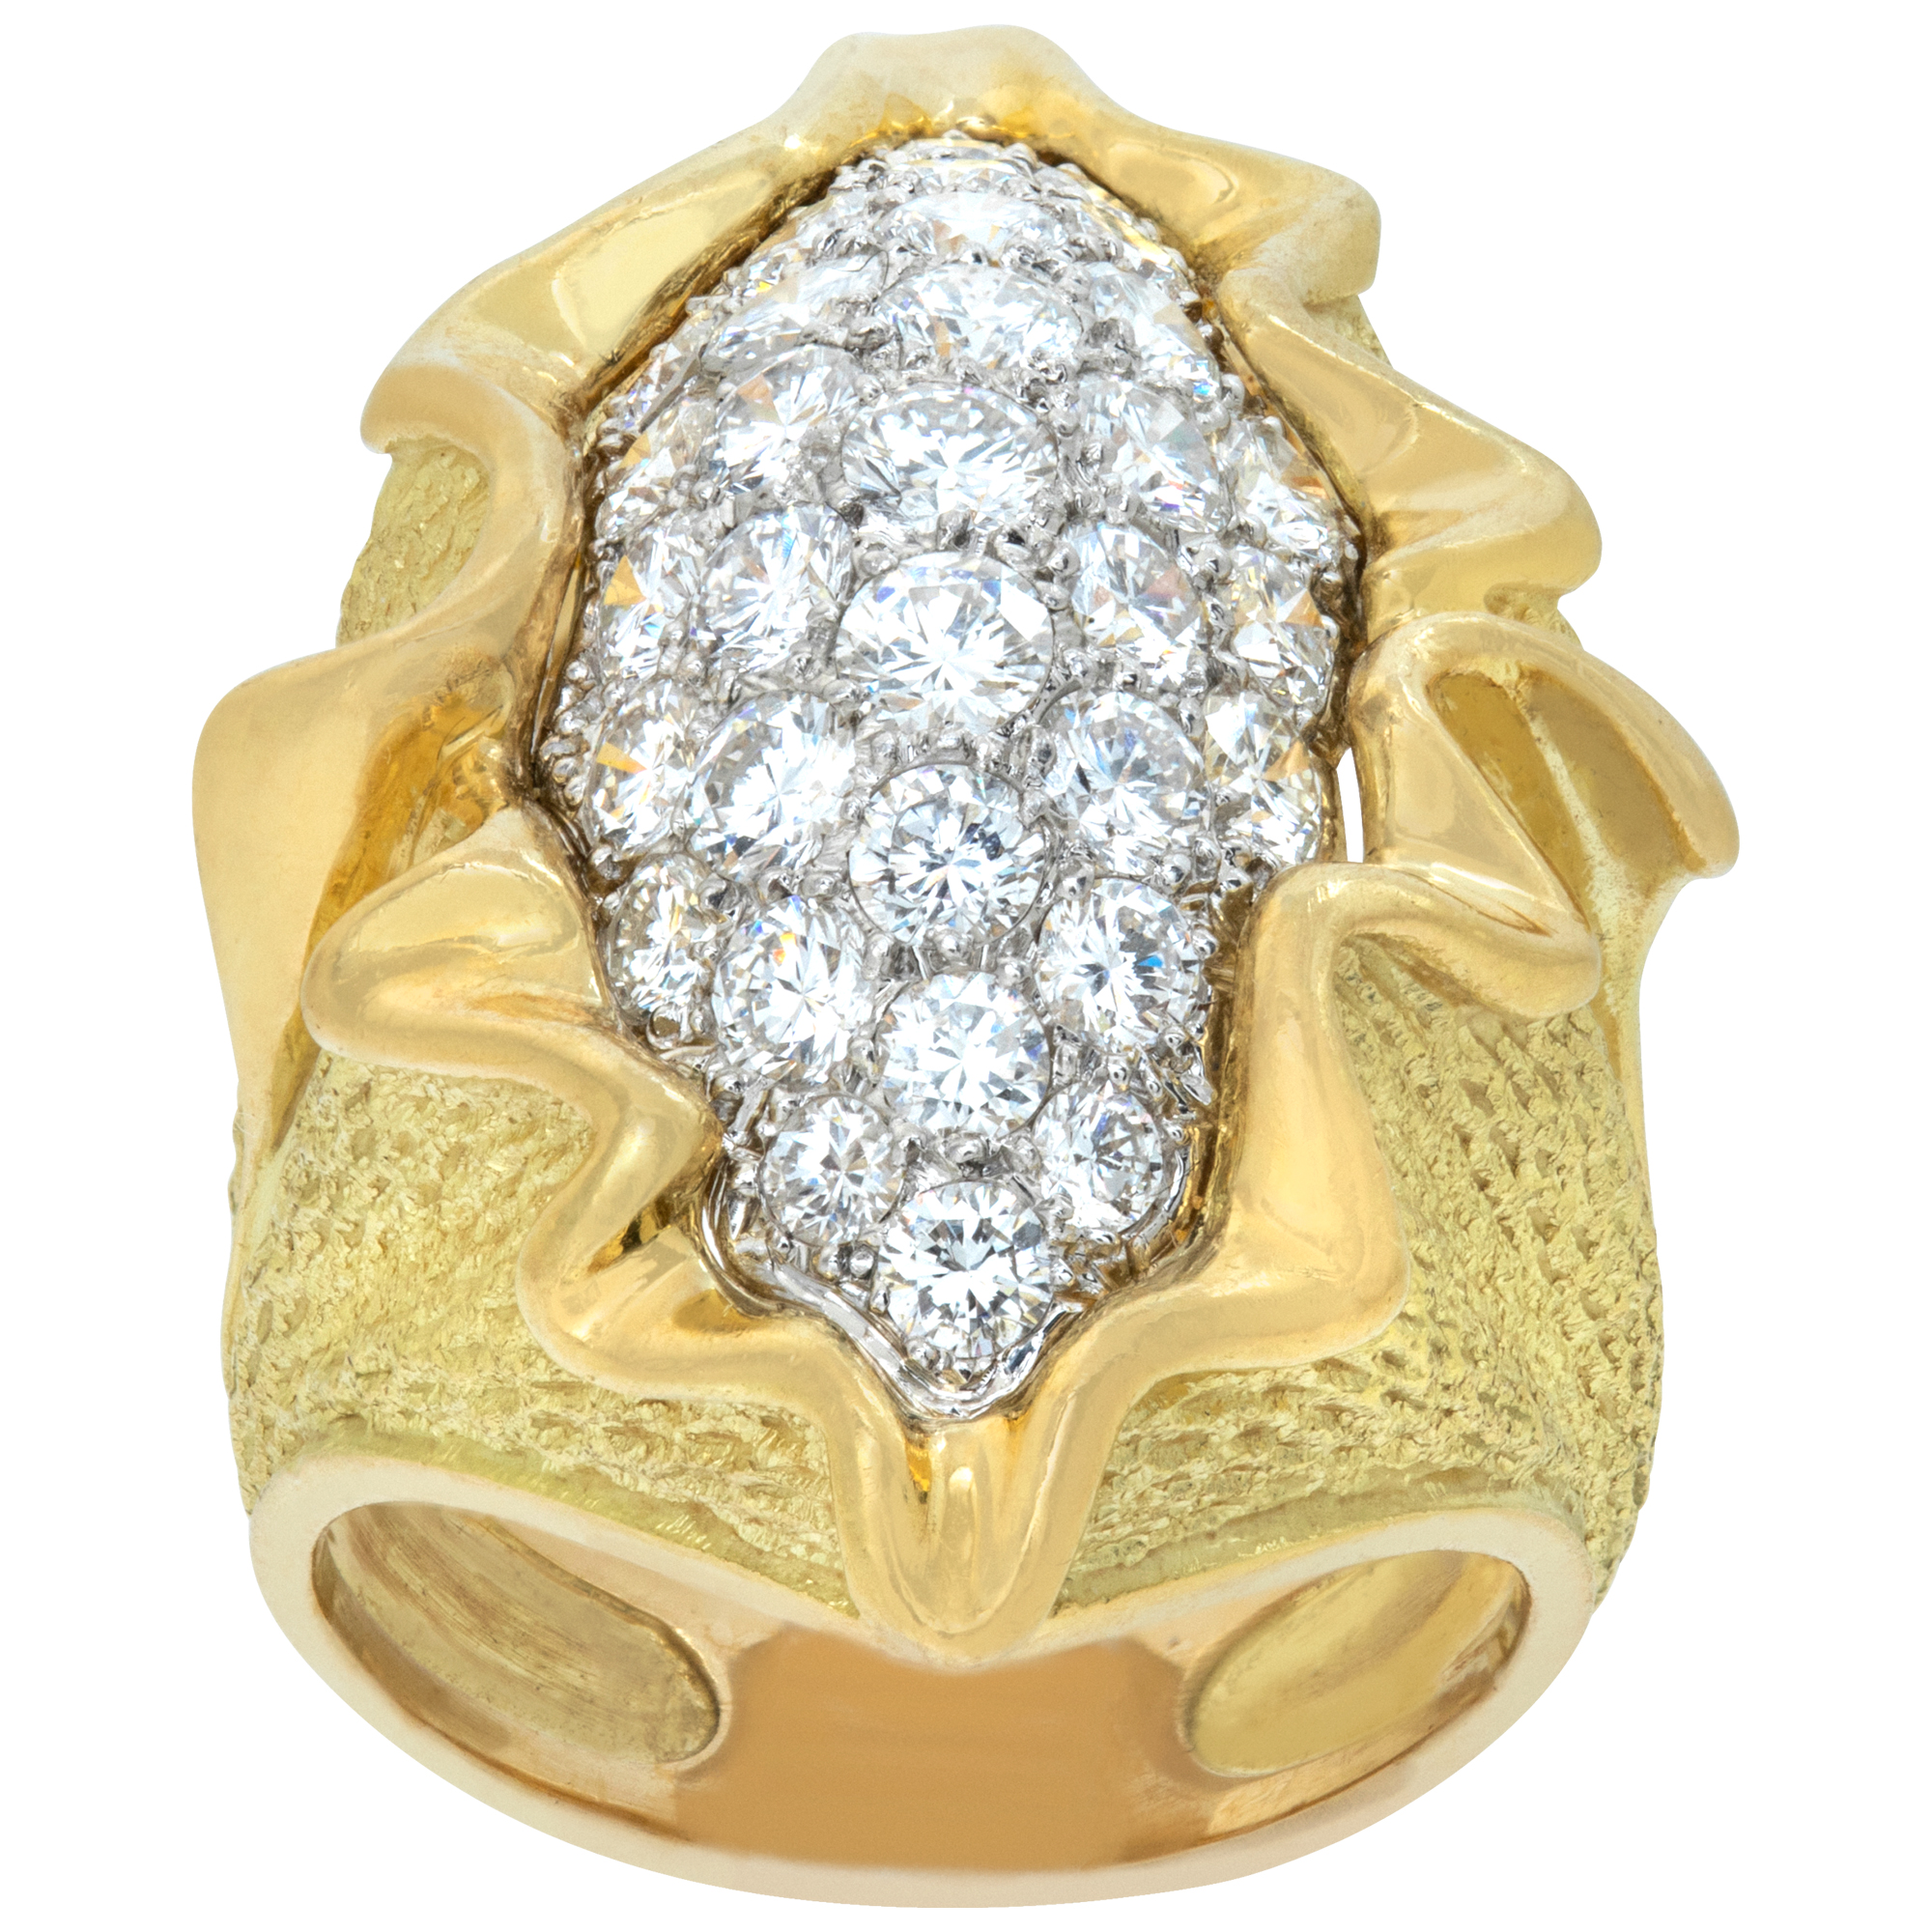 Wave ring with round brilliant cut diamonds set in 18k yellow and white gold.